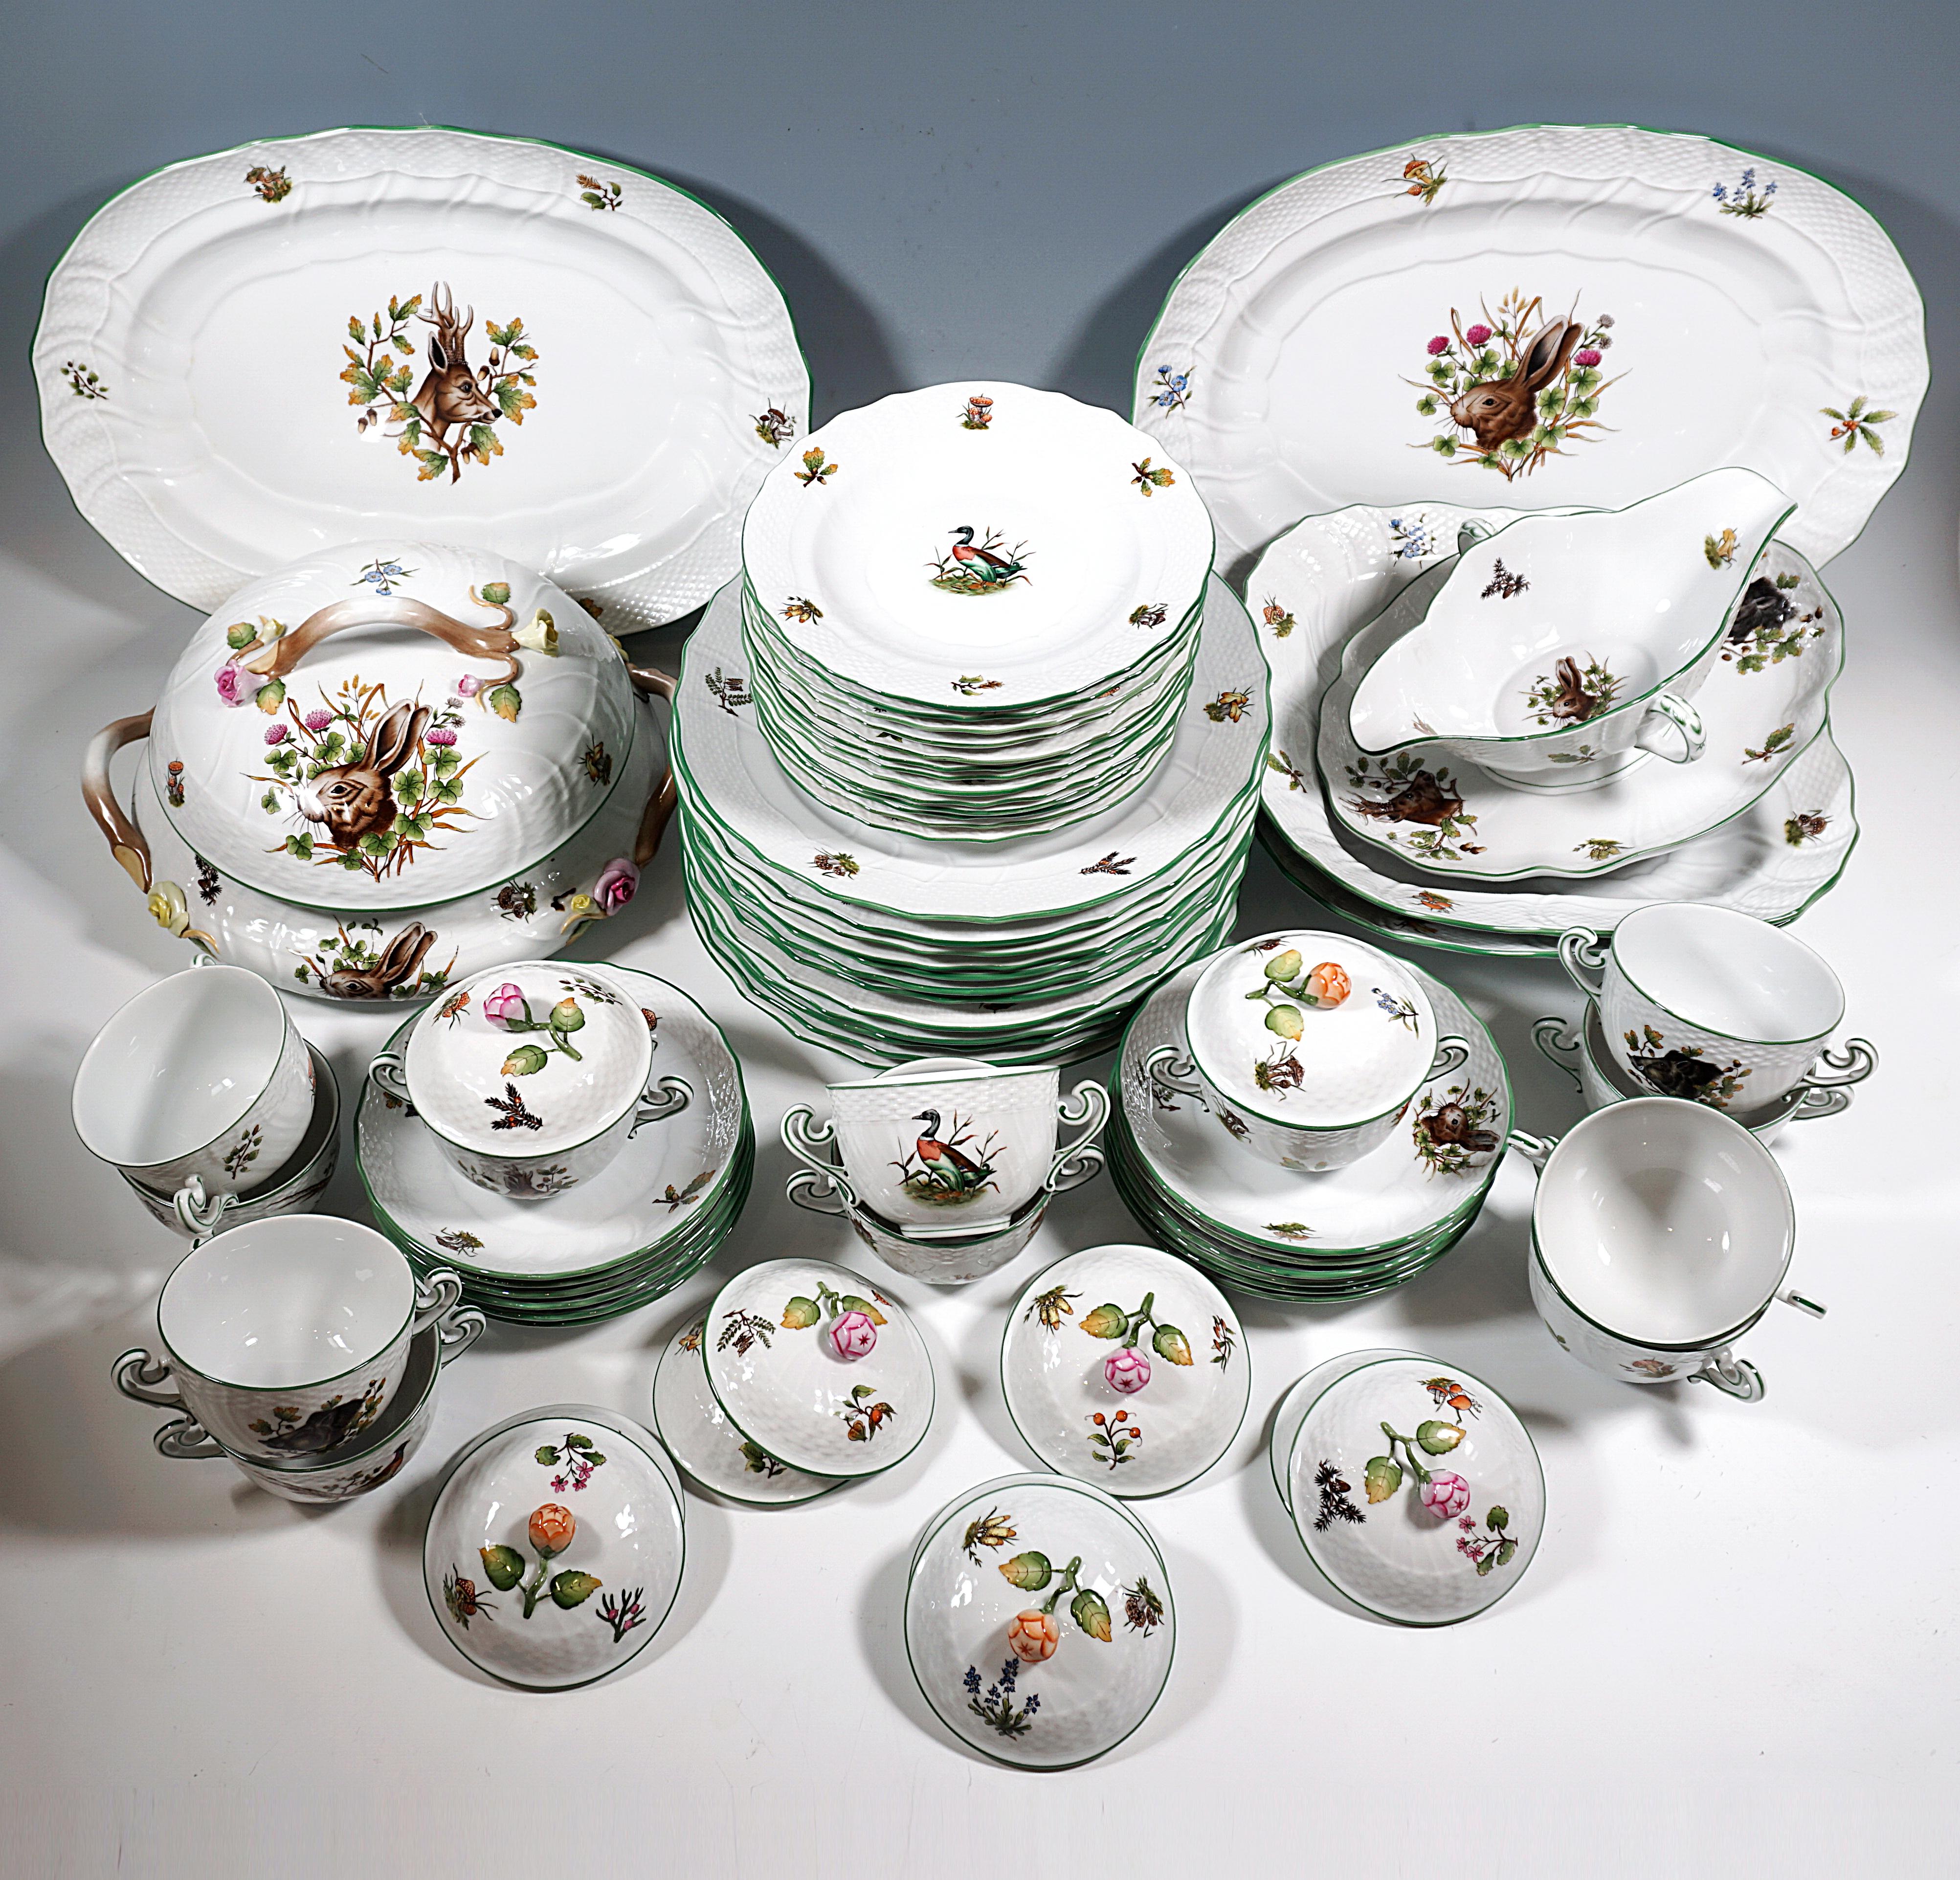 Excellent Herend dinner service consisting of 54 parts:
1 soup tureen, 12 soup bowls with lids, 12 saucers, 12 dinner plates, 12 bread/dessert plates, 1 sauce boat, 2 oval serving plates, 2 square side dishes.

Form:   Neuosier, basket edge relief